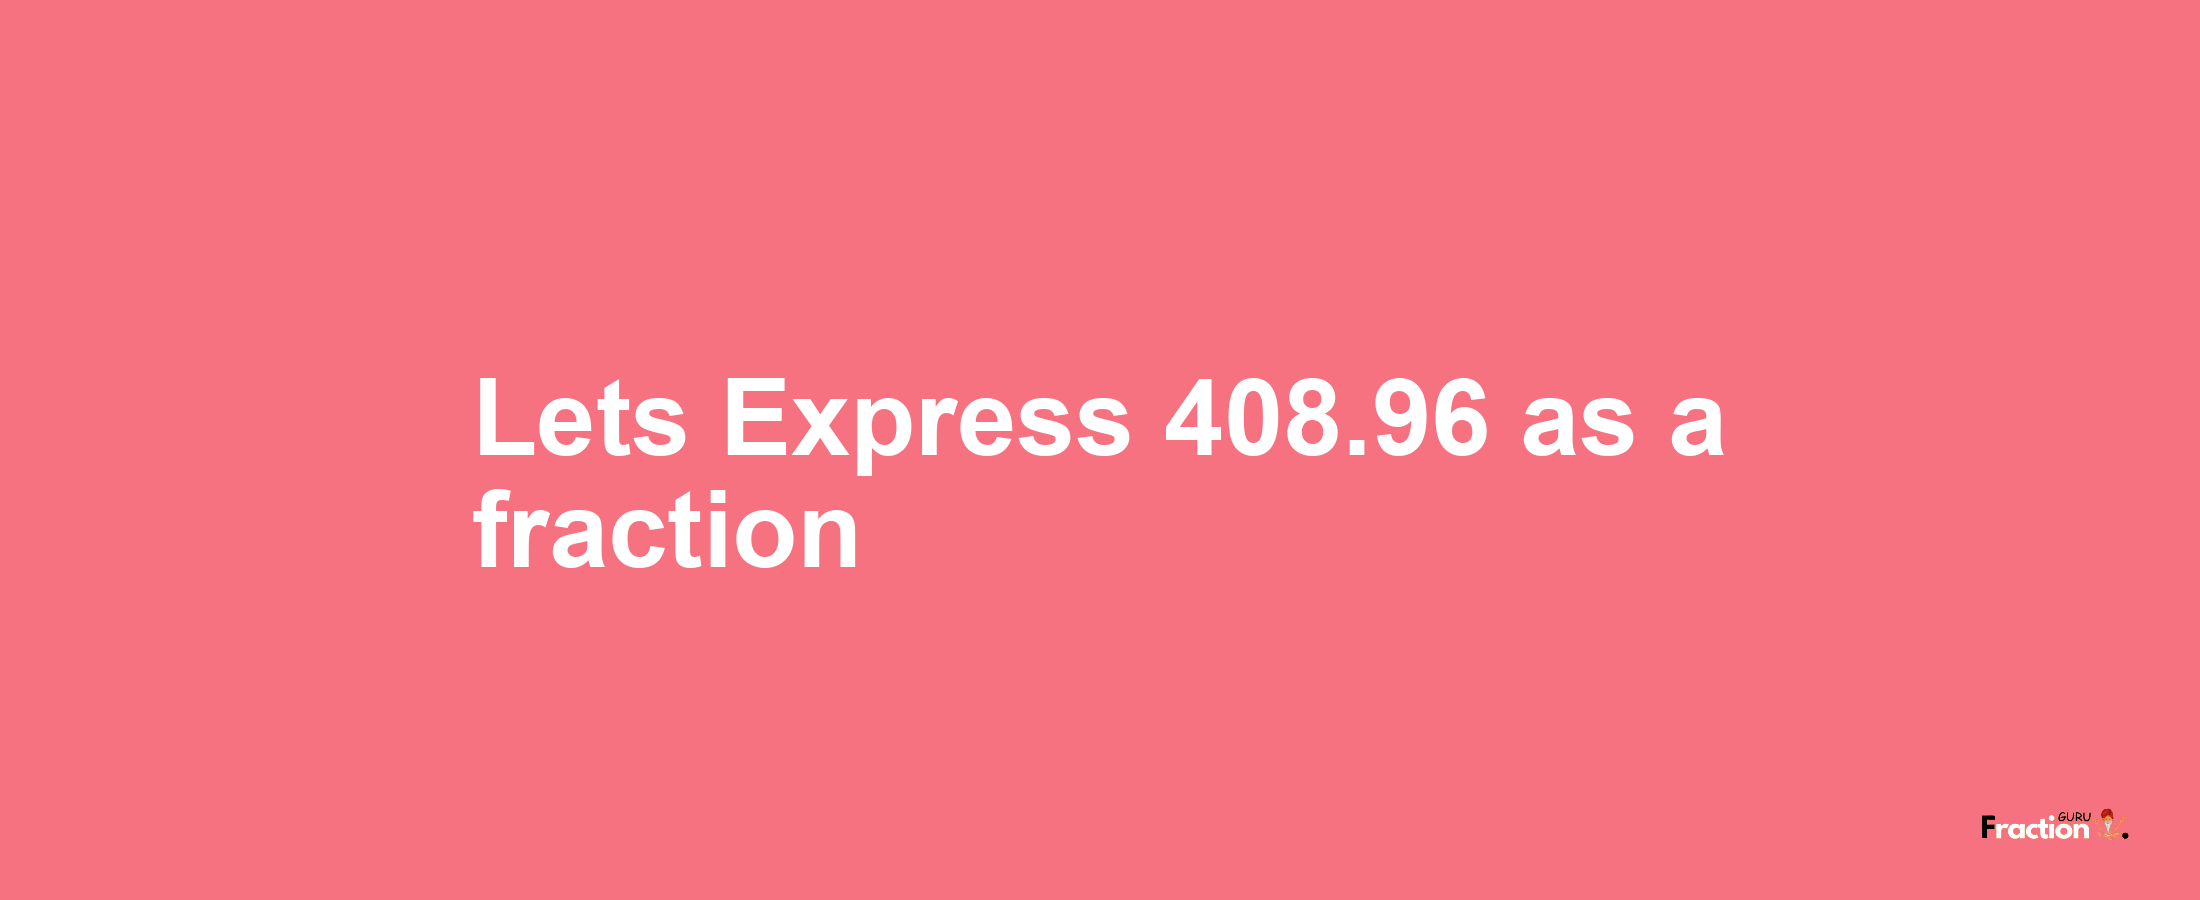 Lets Express 408.96 as afraction